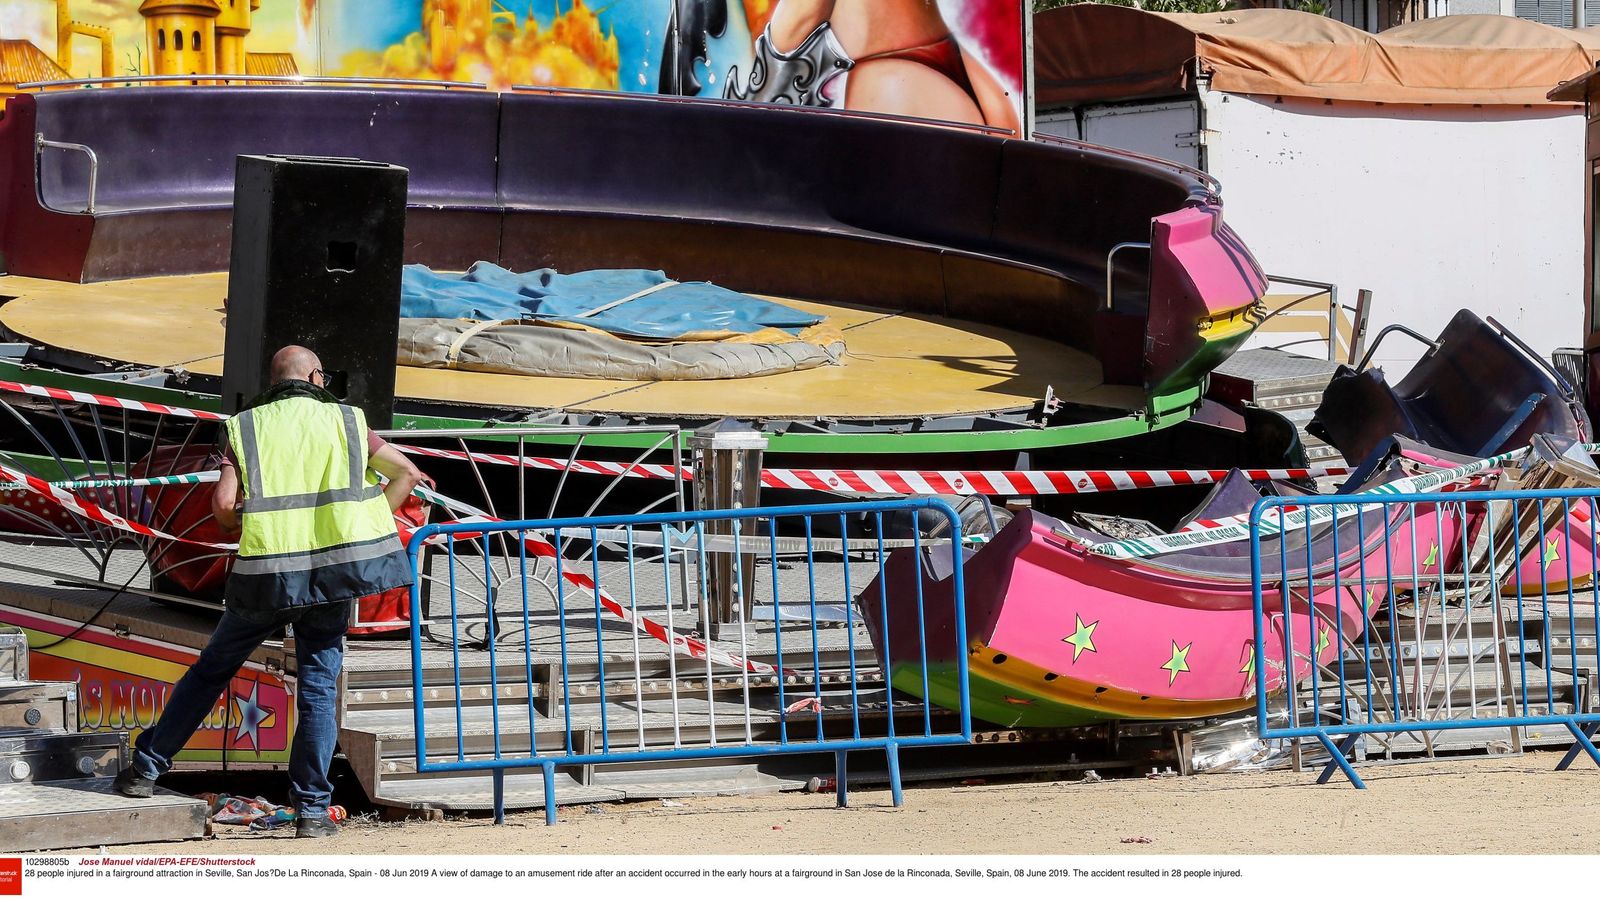 'Major scenes of panic' after fairground ride accident injures 28